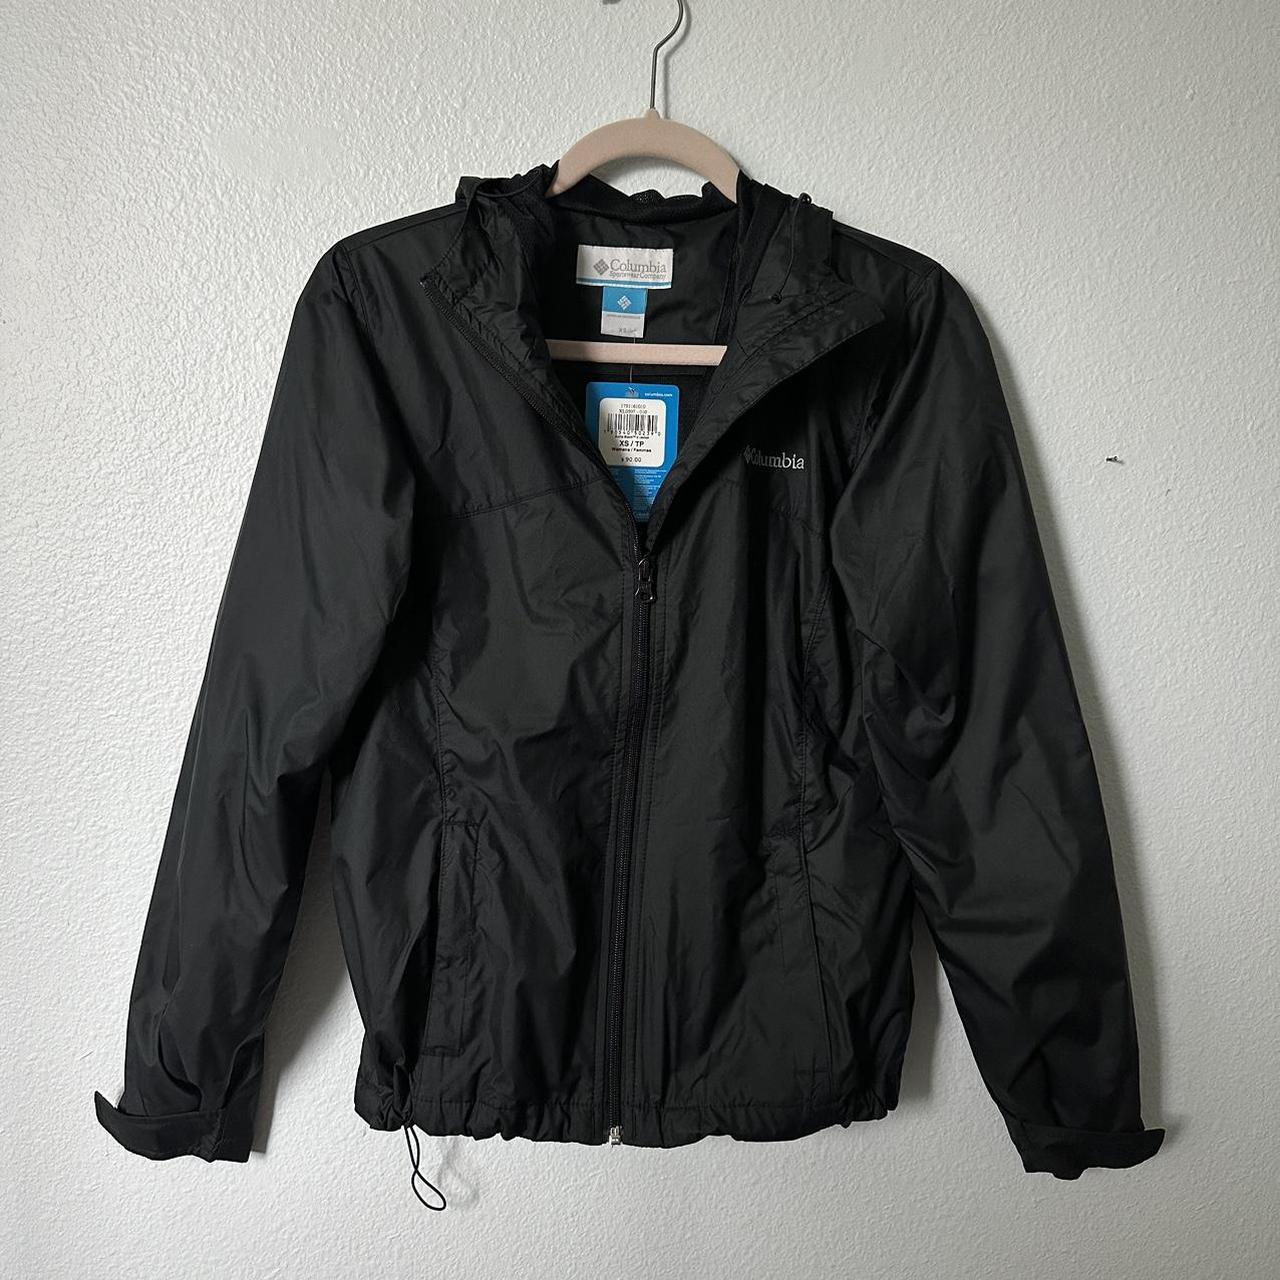 Columbia jacket 🧥 Small 23x24 Small blemishes marks - Depop